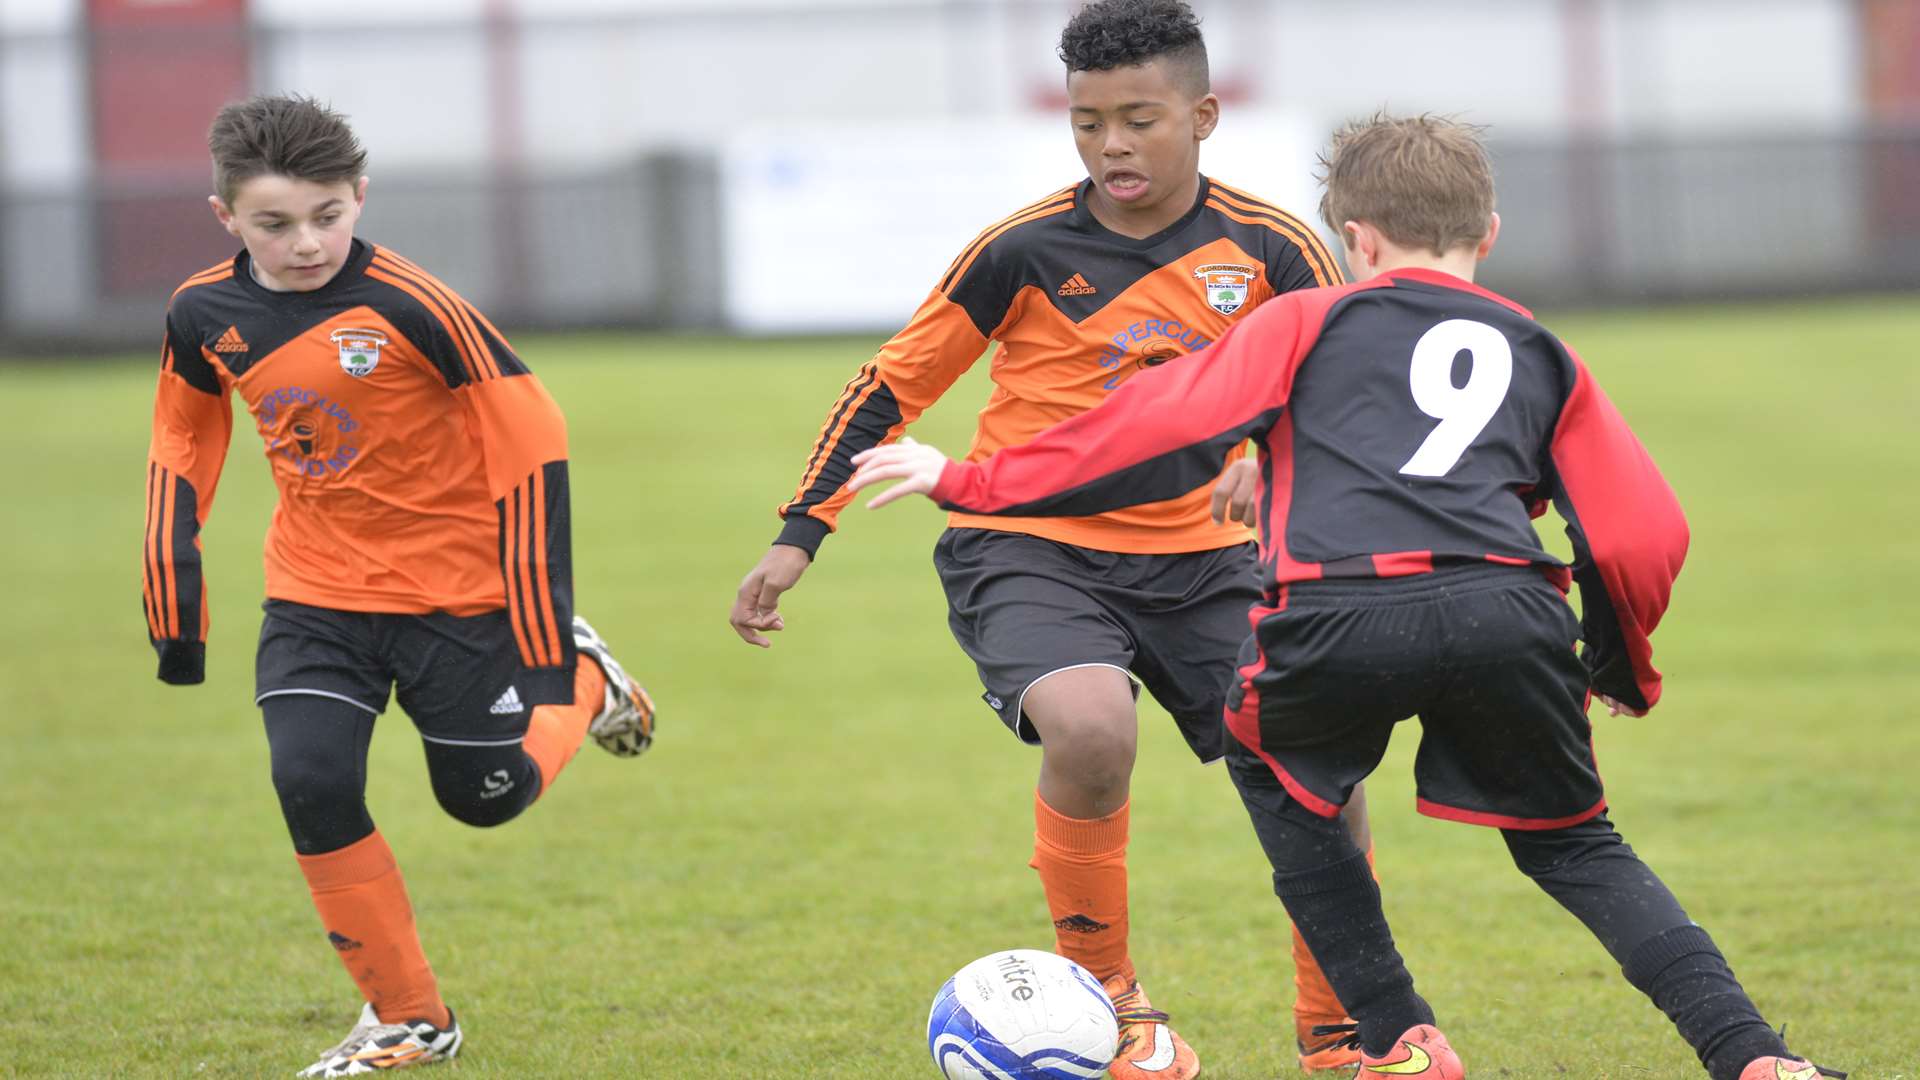 Lordswood Youth (orange) in possession against Meopham Colts in the Under-12 League Cup final Picture: Ruth Cuerden